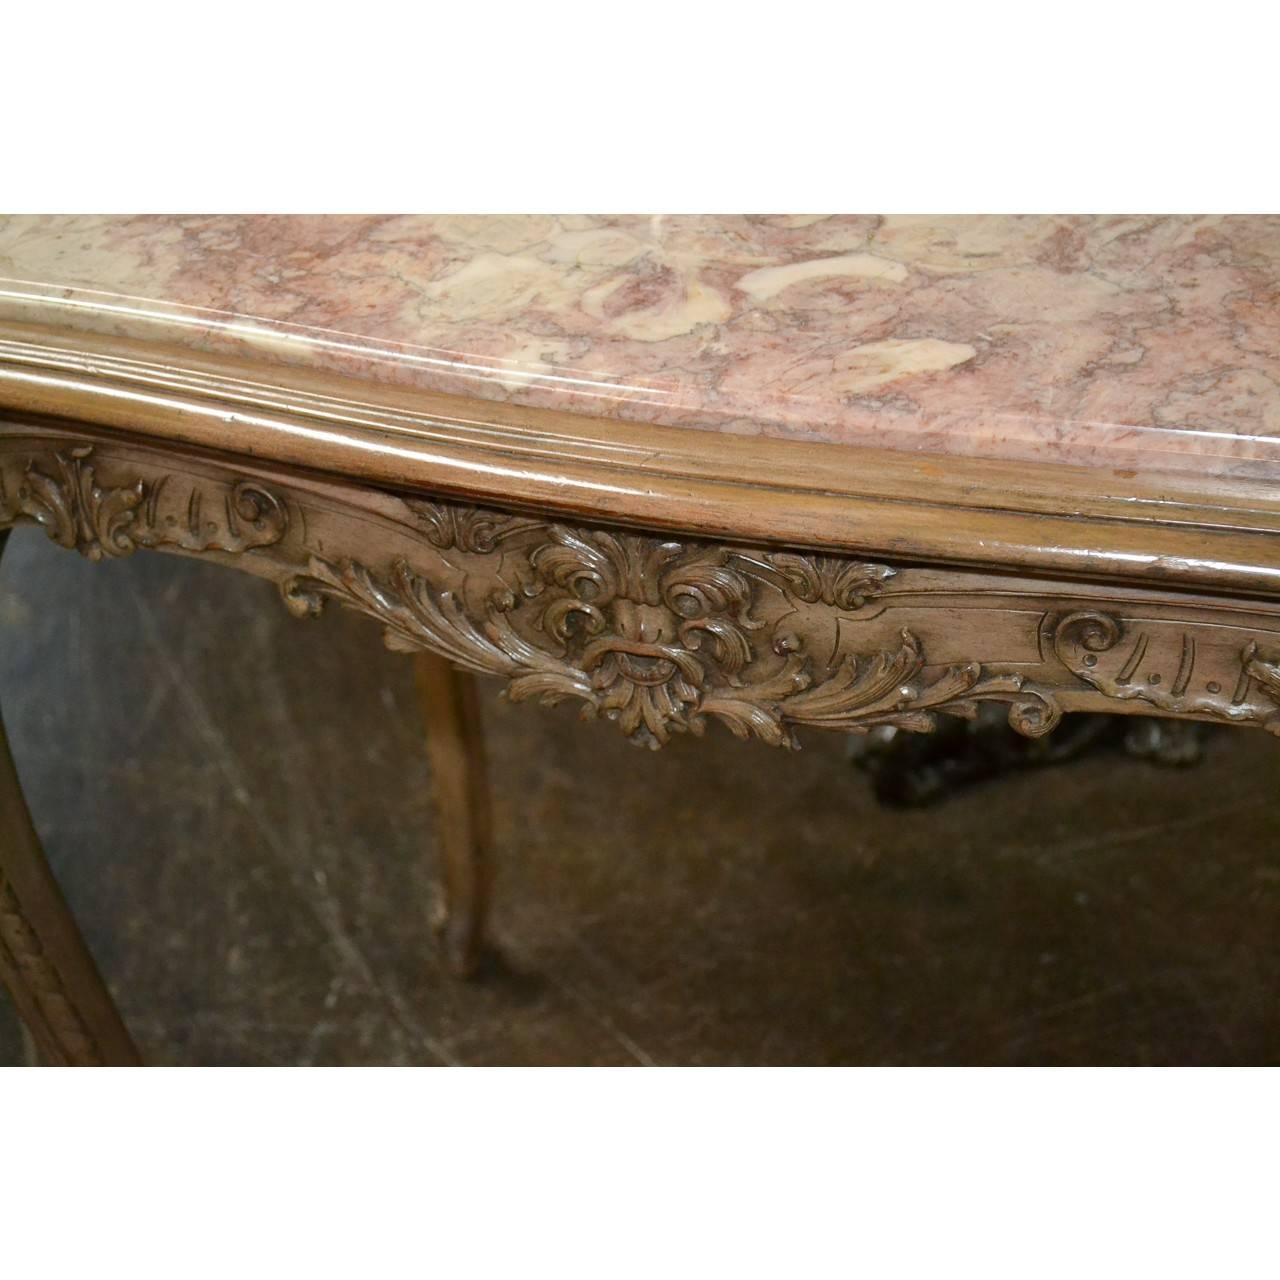 Very elegant and fine quality, 19th century French salon table with a serpentine shaped top inset with a gorgeous pale rouge, gray, and white marble. The carved wood and lacquered base with ornate acanthus leaf and fluer-de-lis accents on graceful